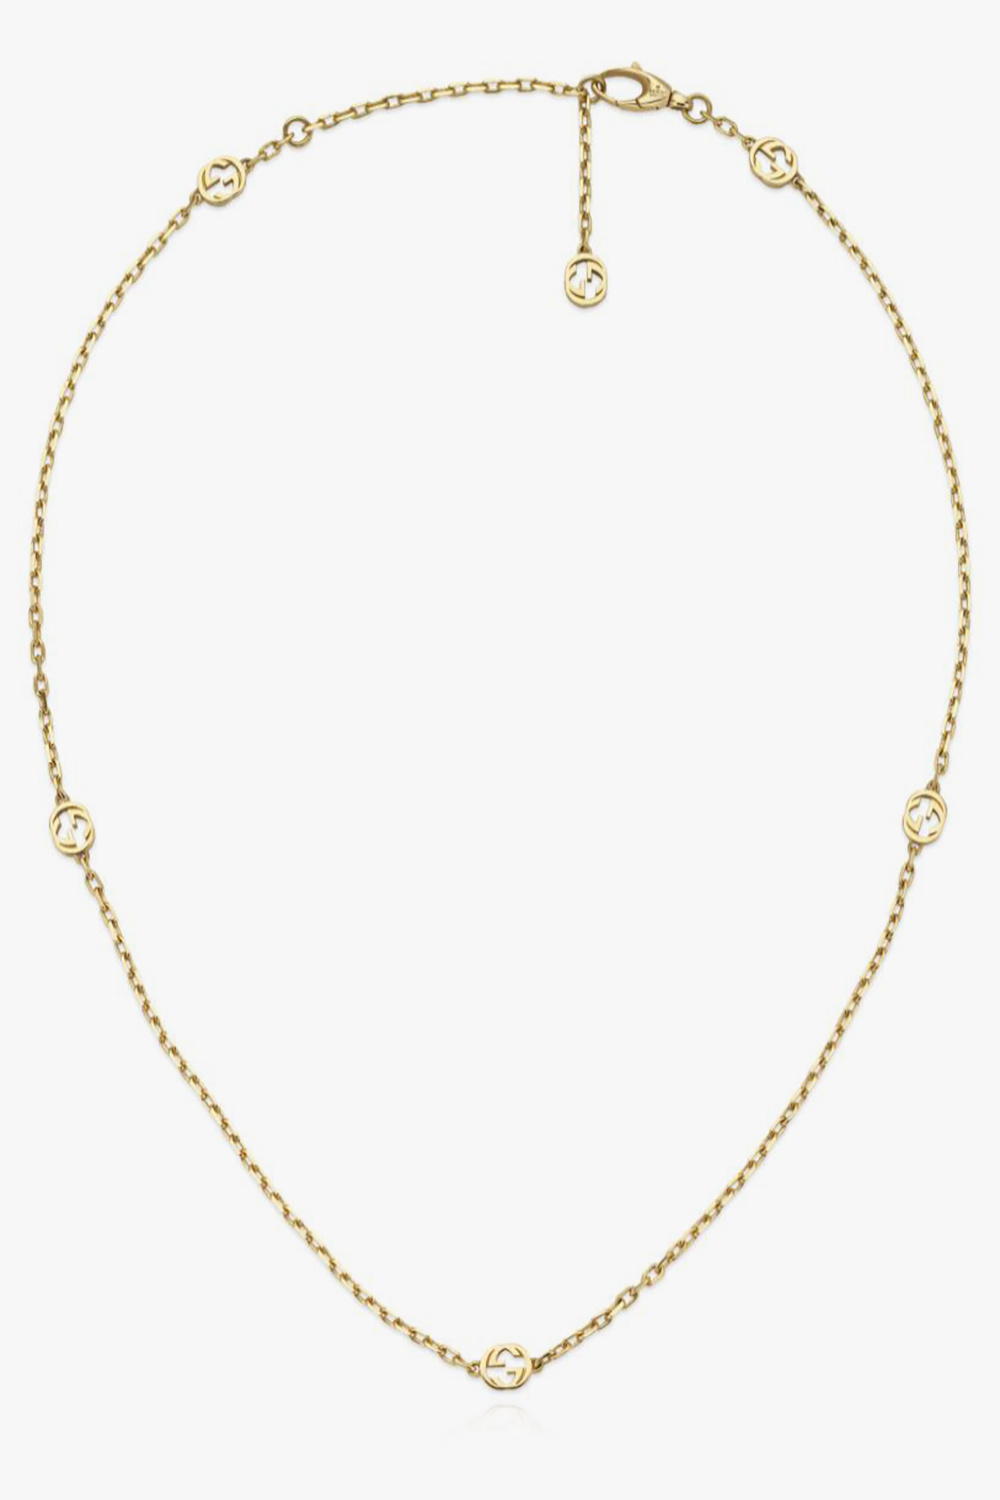 Gucci Gold necklace